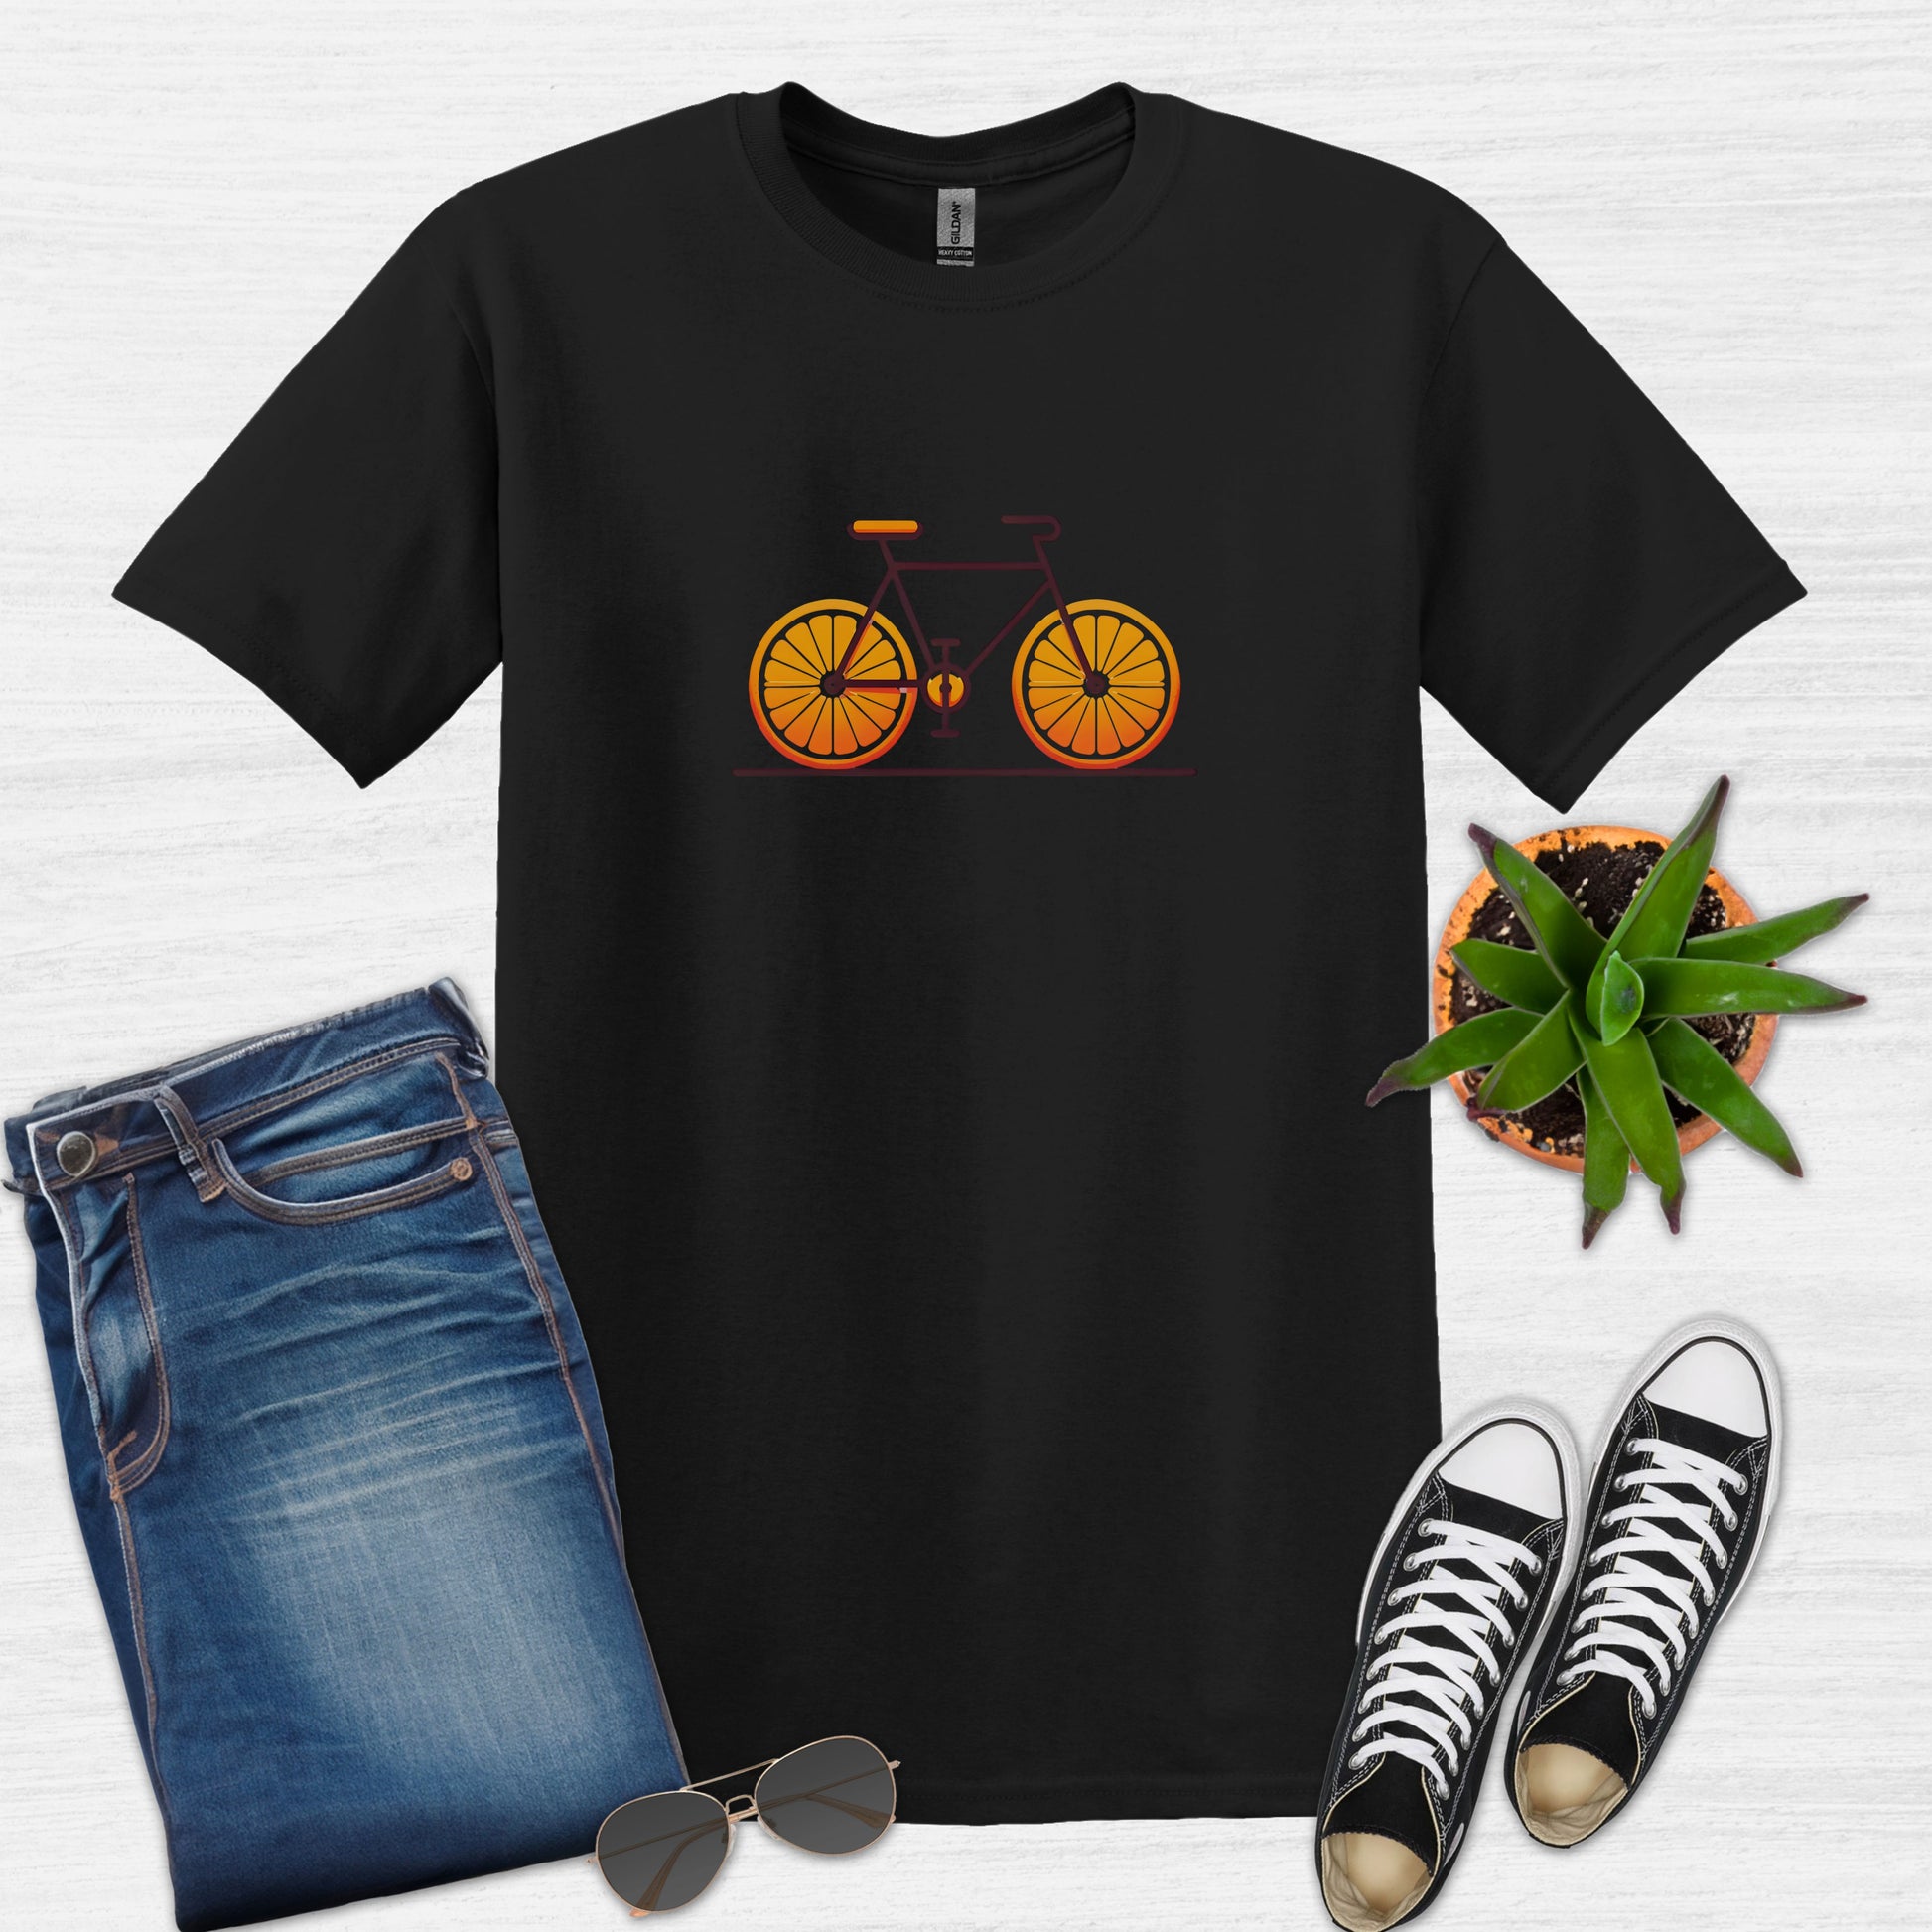 Bicycle with orange slices wheels Graphic T-Shirt for Men Black 2